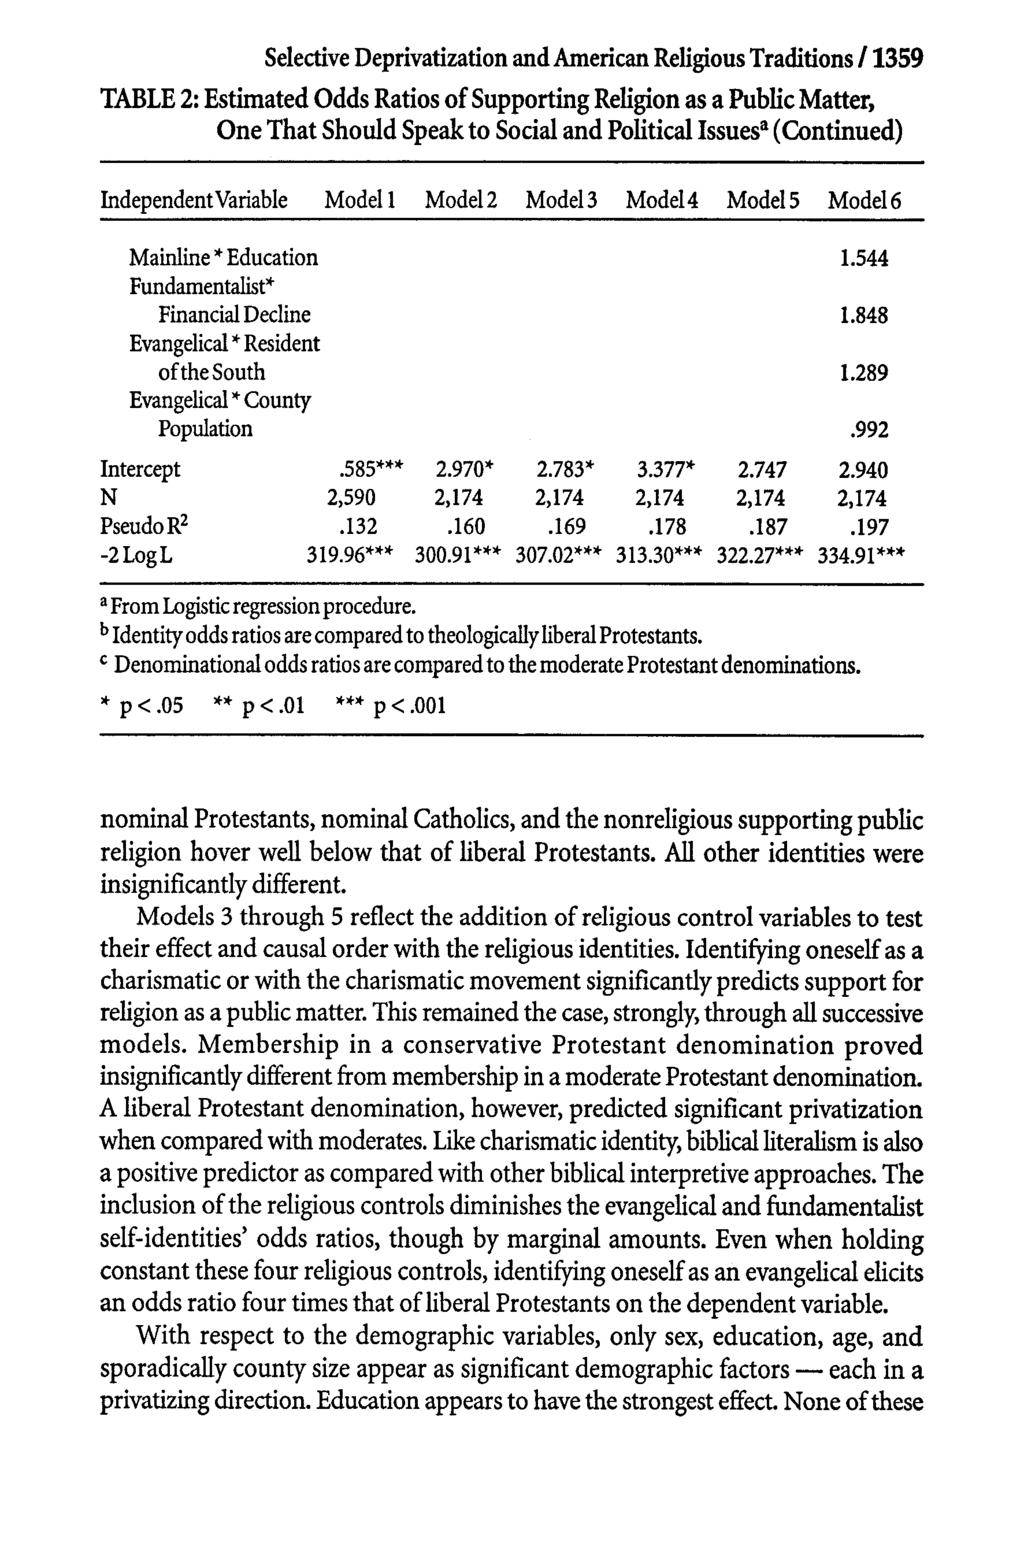 Selective Deprivatization and American Religious Traditions / 1359 TABLE 2: Estimated Odds Ratios of Supporting Religion as a Public Matter, One That Should Speak to Social and Political Issuesa